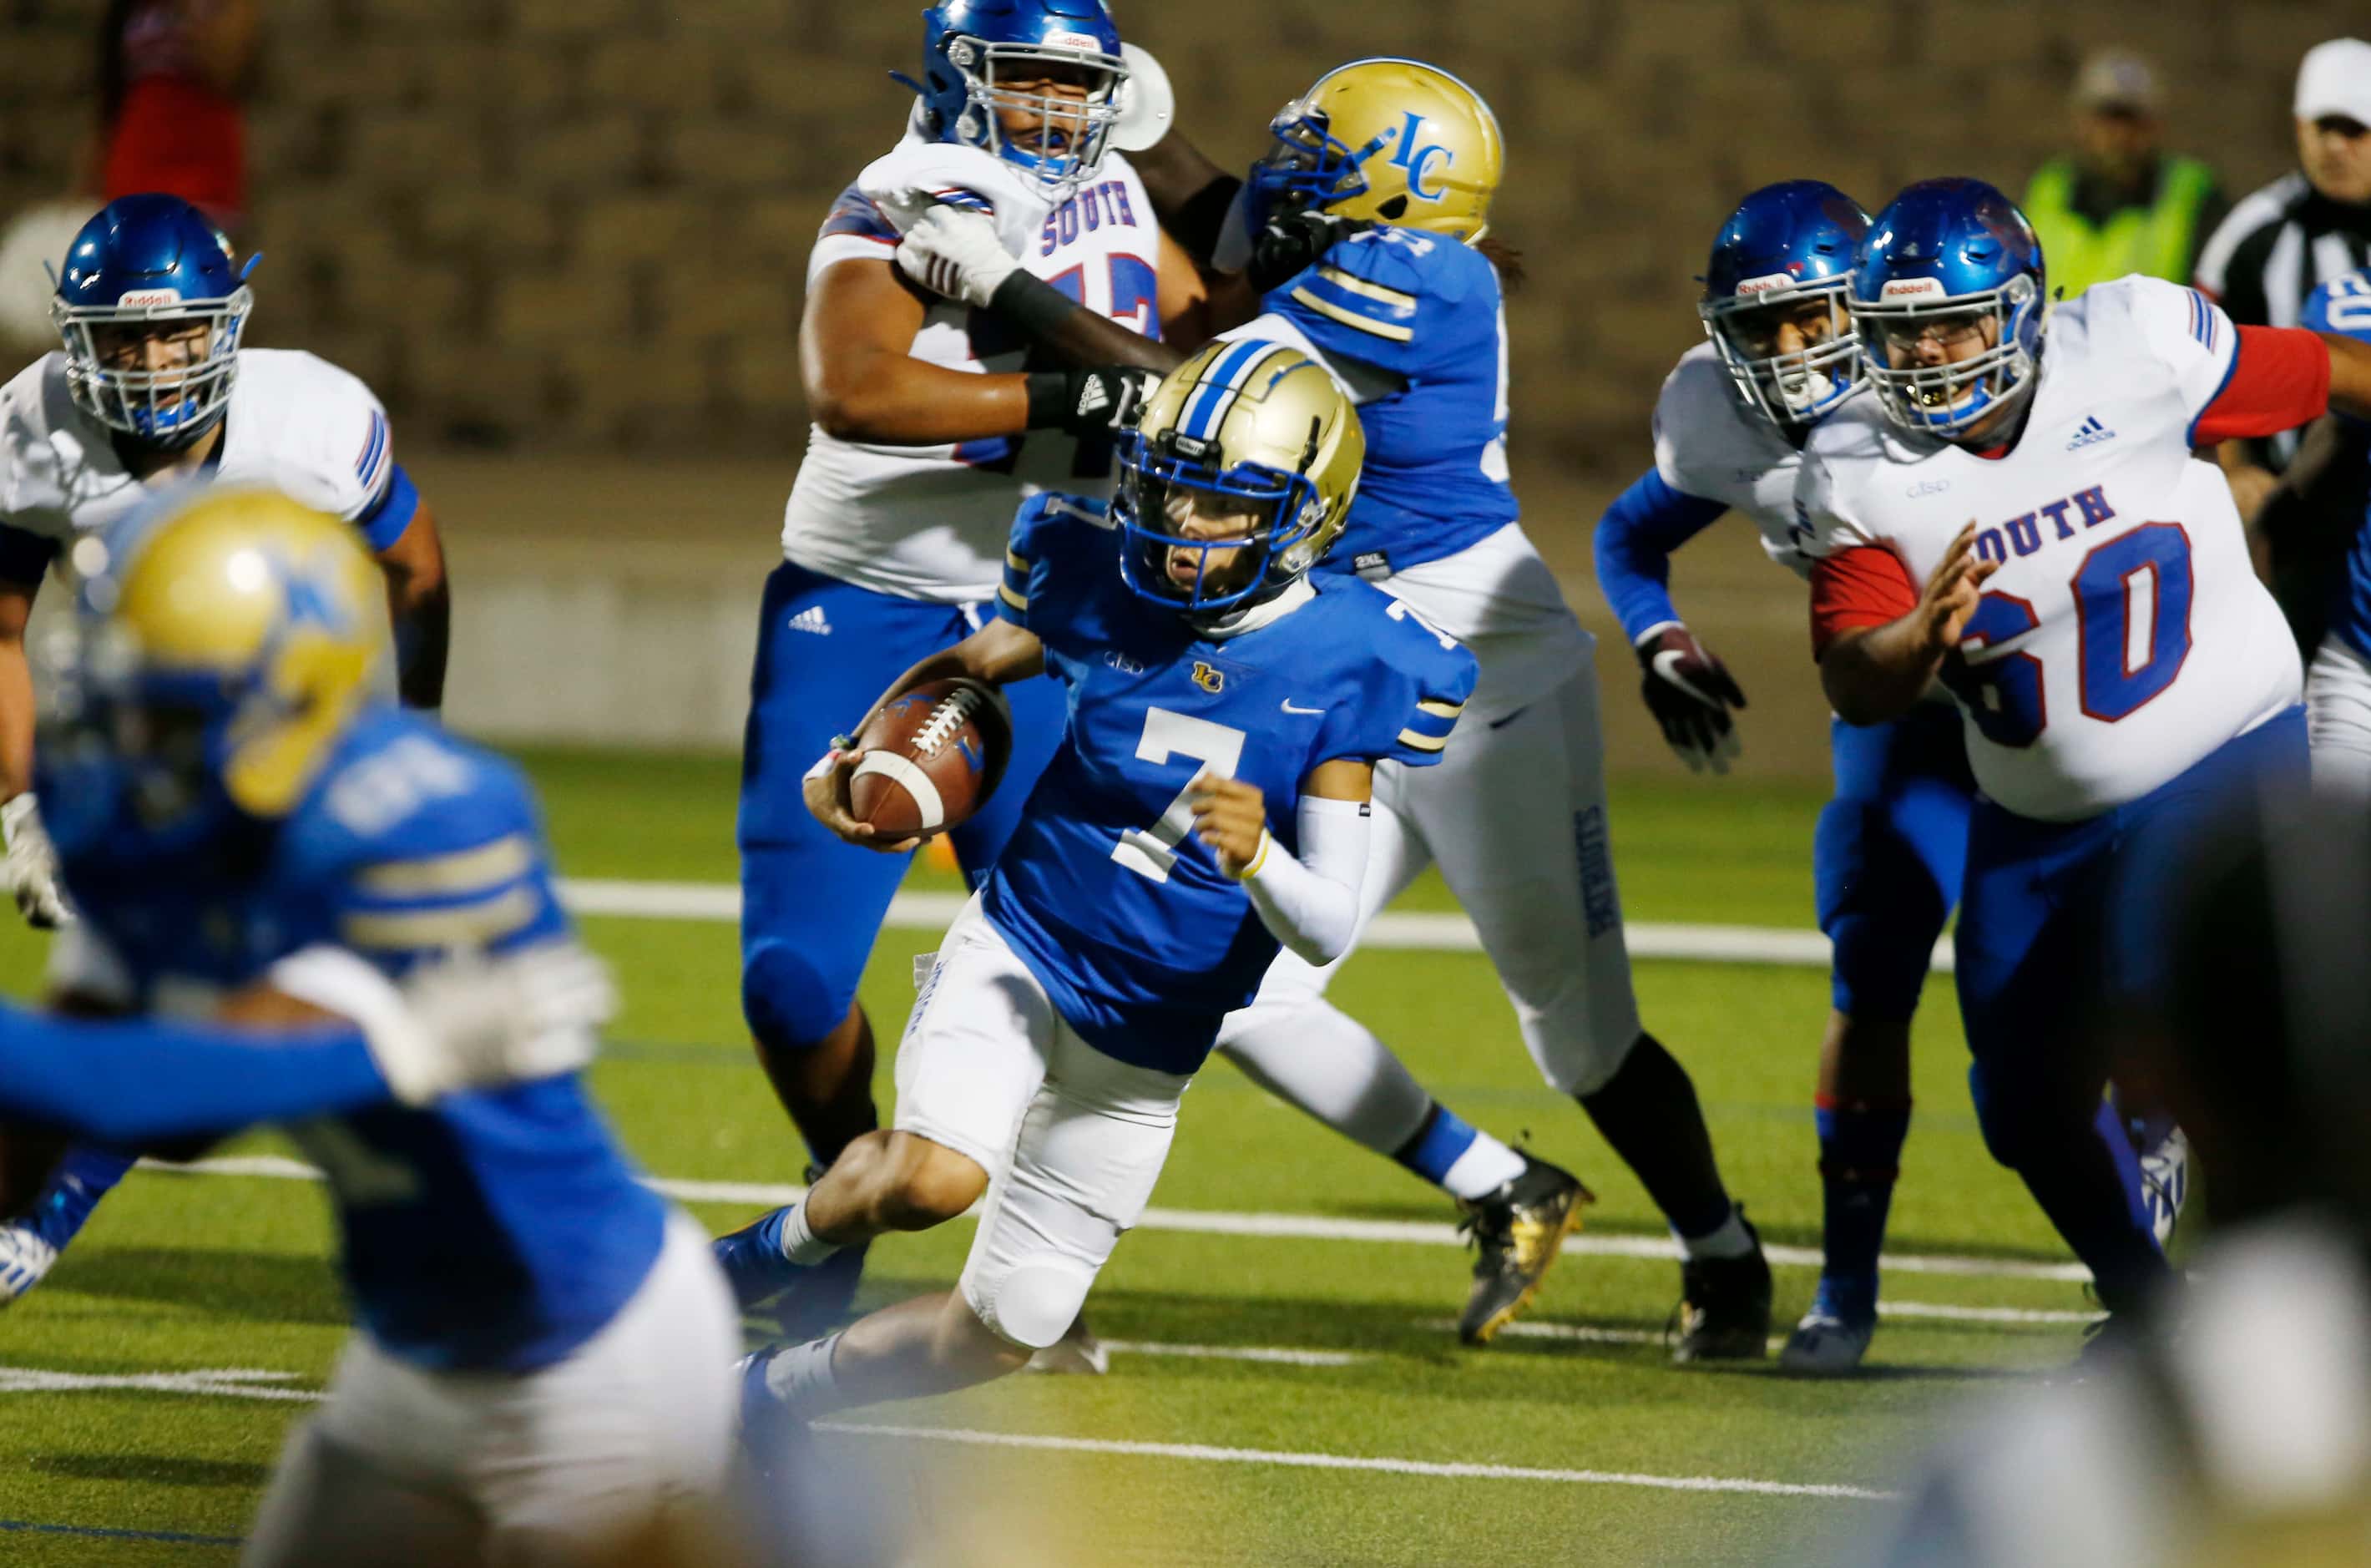 Lakeview QB Michael Hierro (7) looks for running room in a crowd, while scrambling during...